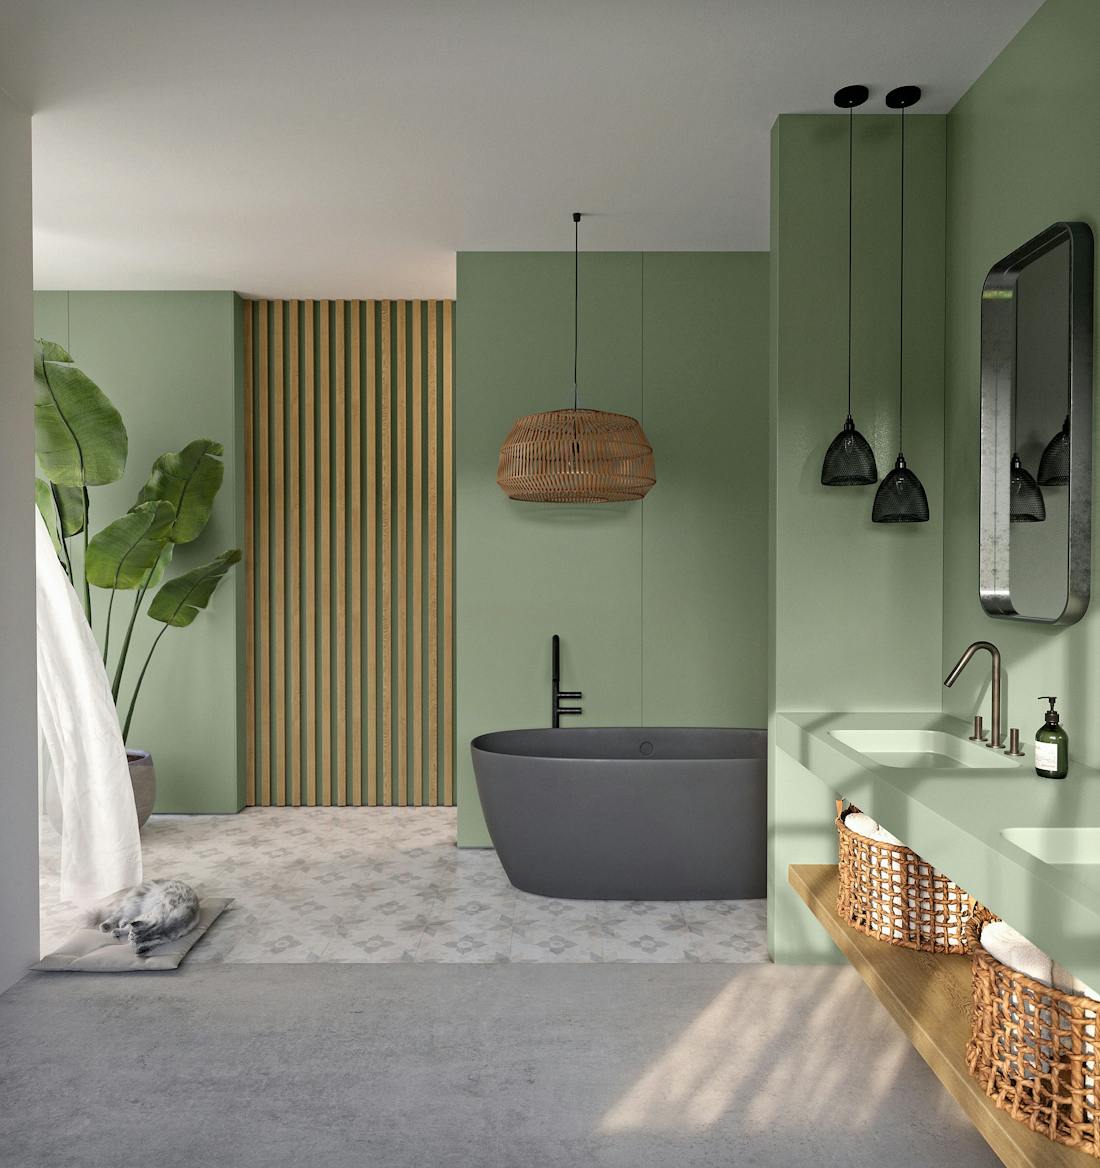 The master bathroom, the new central space in your home